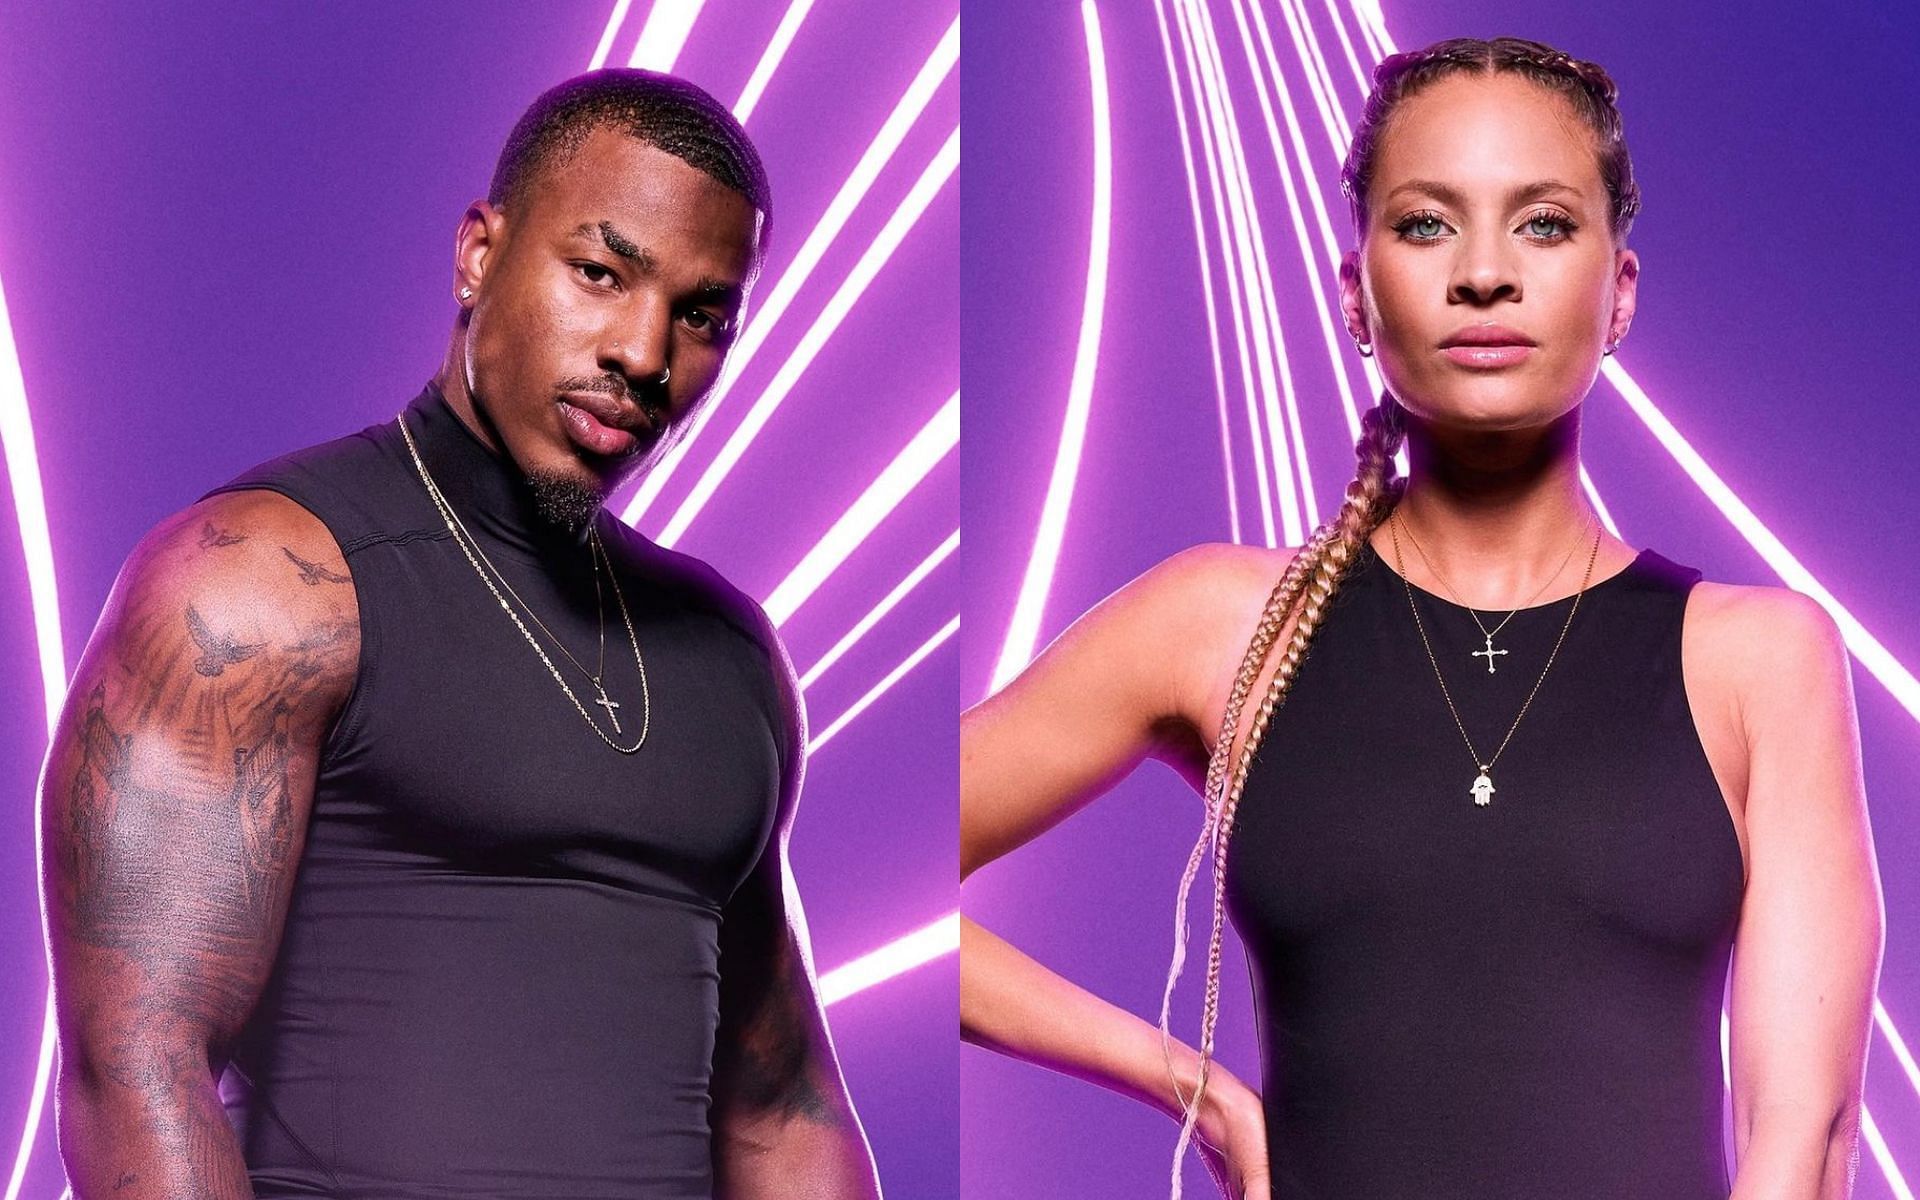 Amber and Chauncey have been dating for an year (Images via c.palmerofficial/ Instagram)